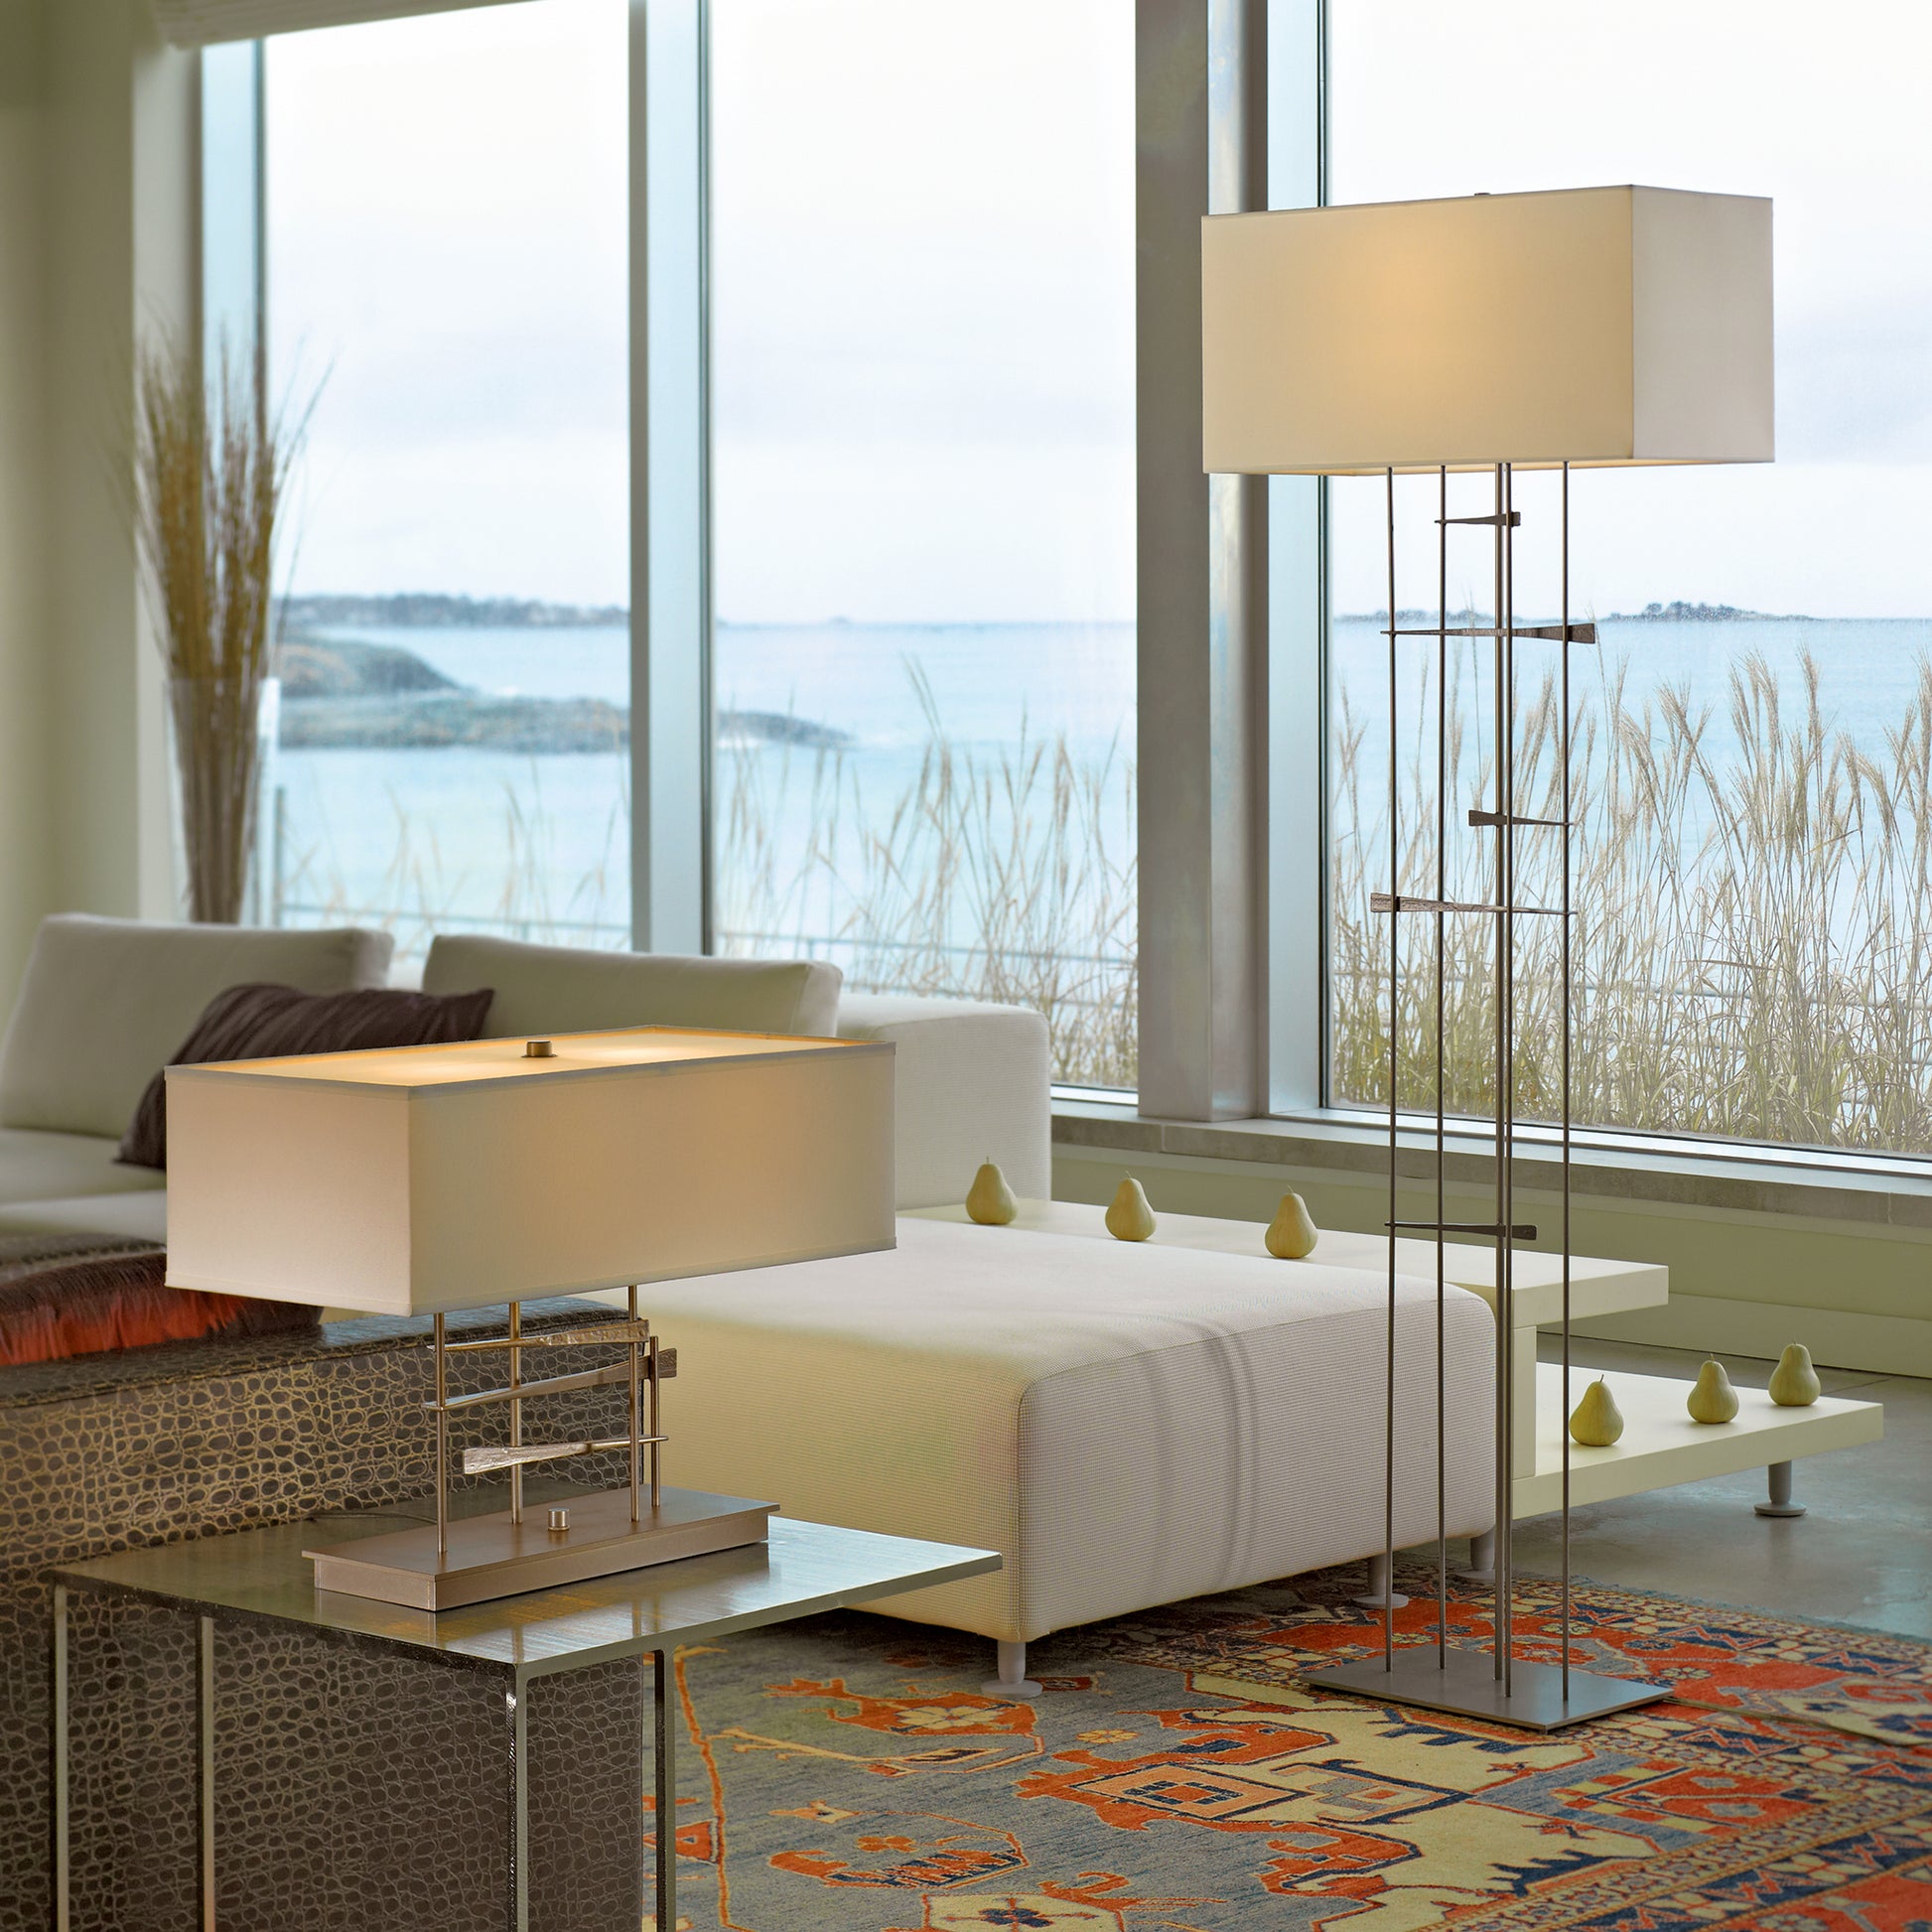 Modern living room overlooking a beach, featuring a white sofa, Hubbardton Forge Cavaletti Table Lamp, side table with books, and a colorful area rug, all bathed in natural light from large windows.